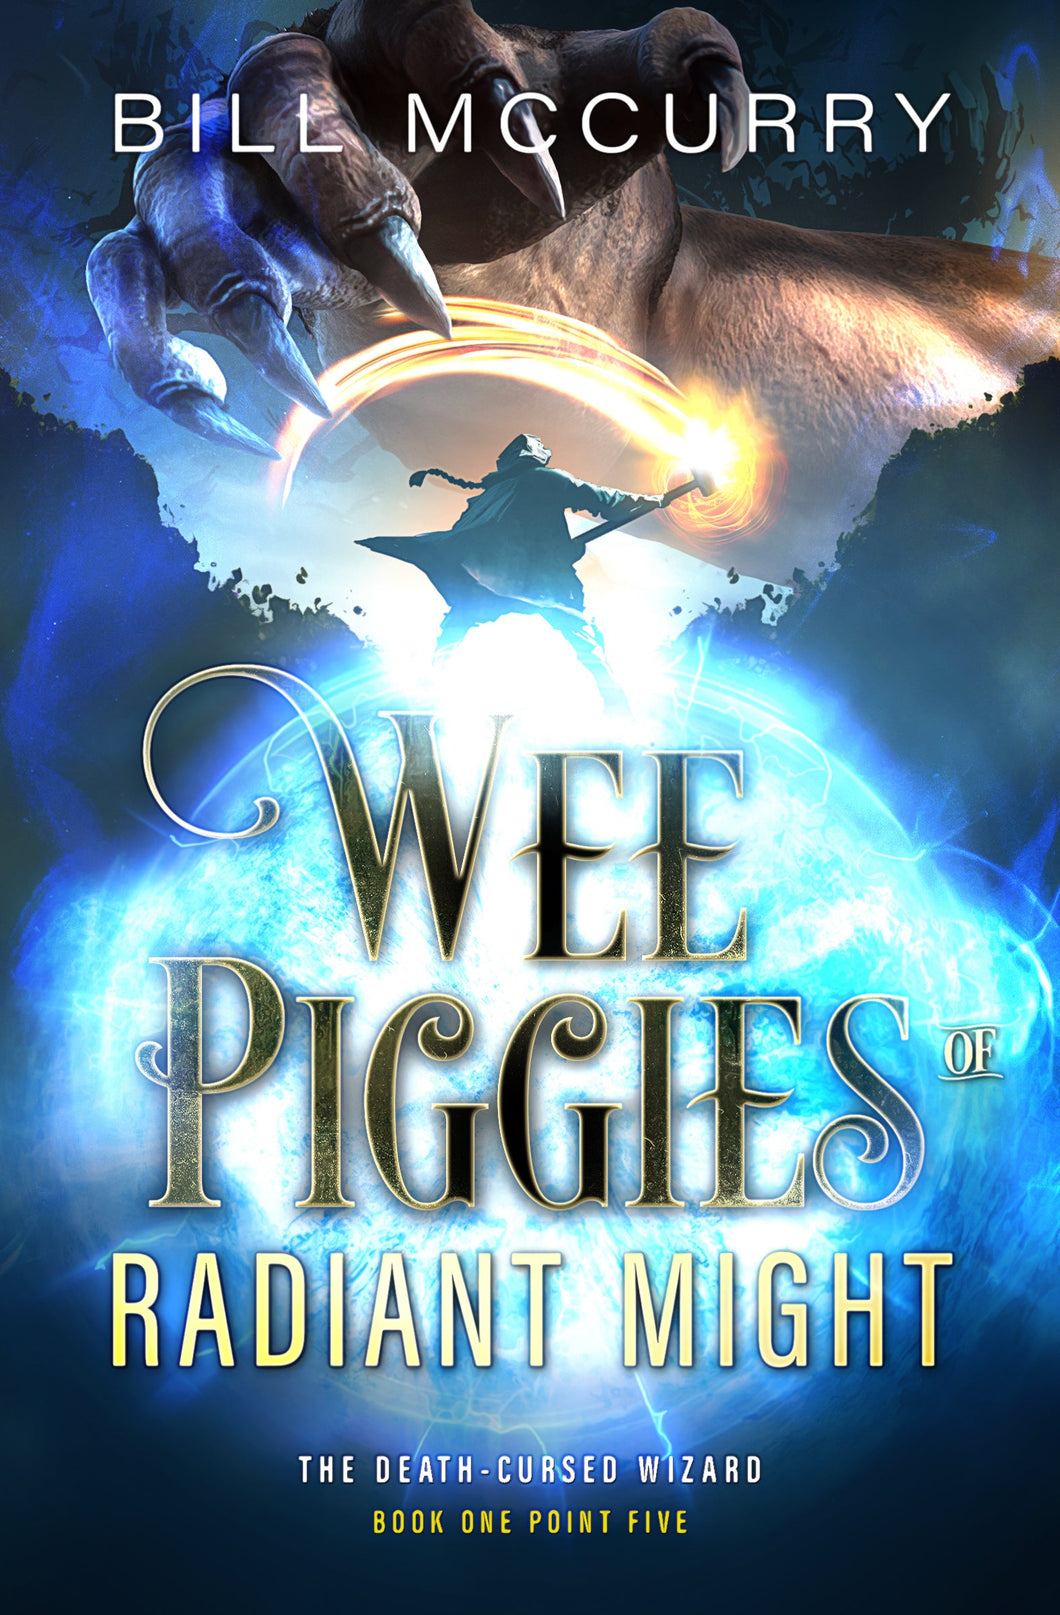 Wee Piggies of Radiant Might (Paperback)